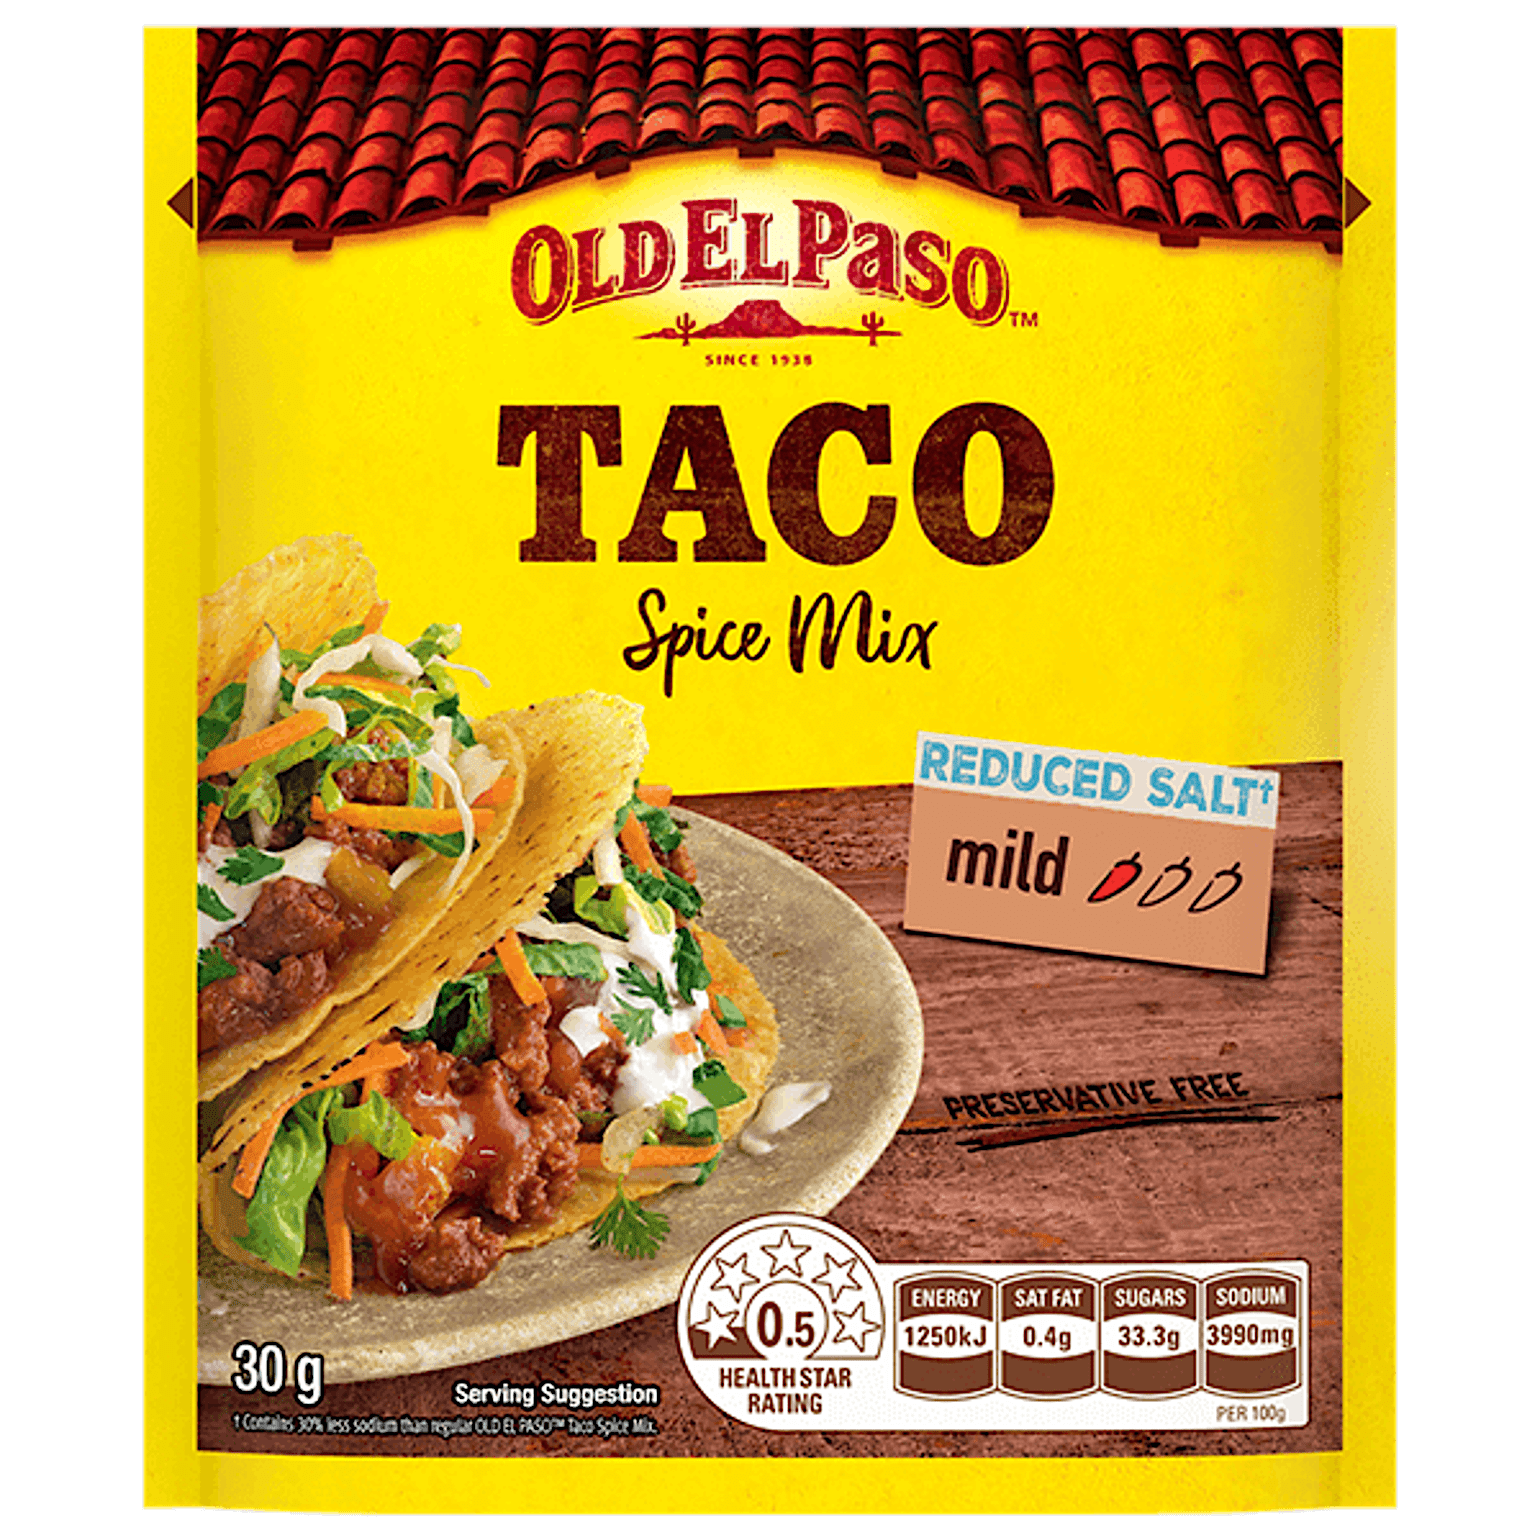 a pack of Old El Paso's reduced salt taco spice mix mild (30g)